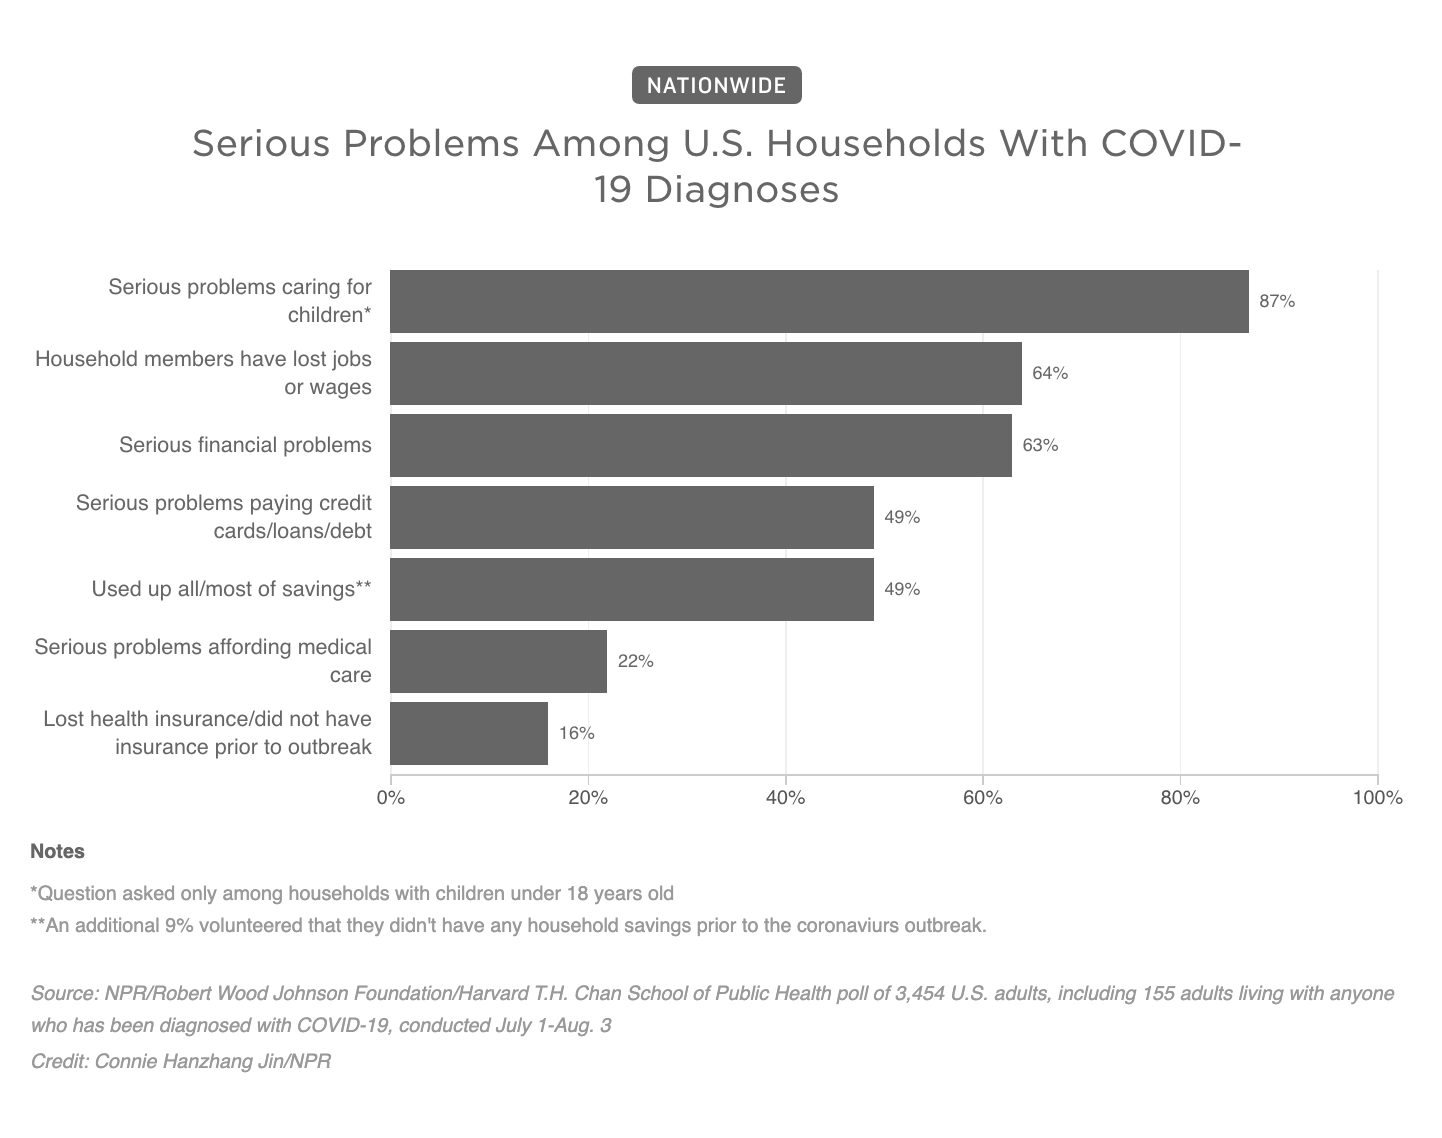 Serious Problems Among U.S. Households With COVID-19 Diagnoses